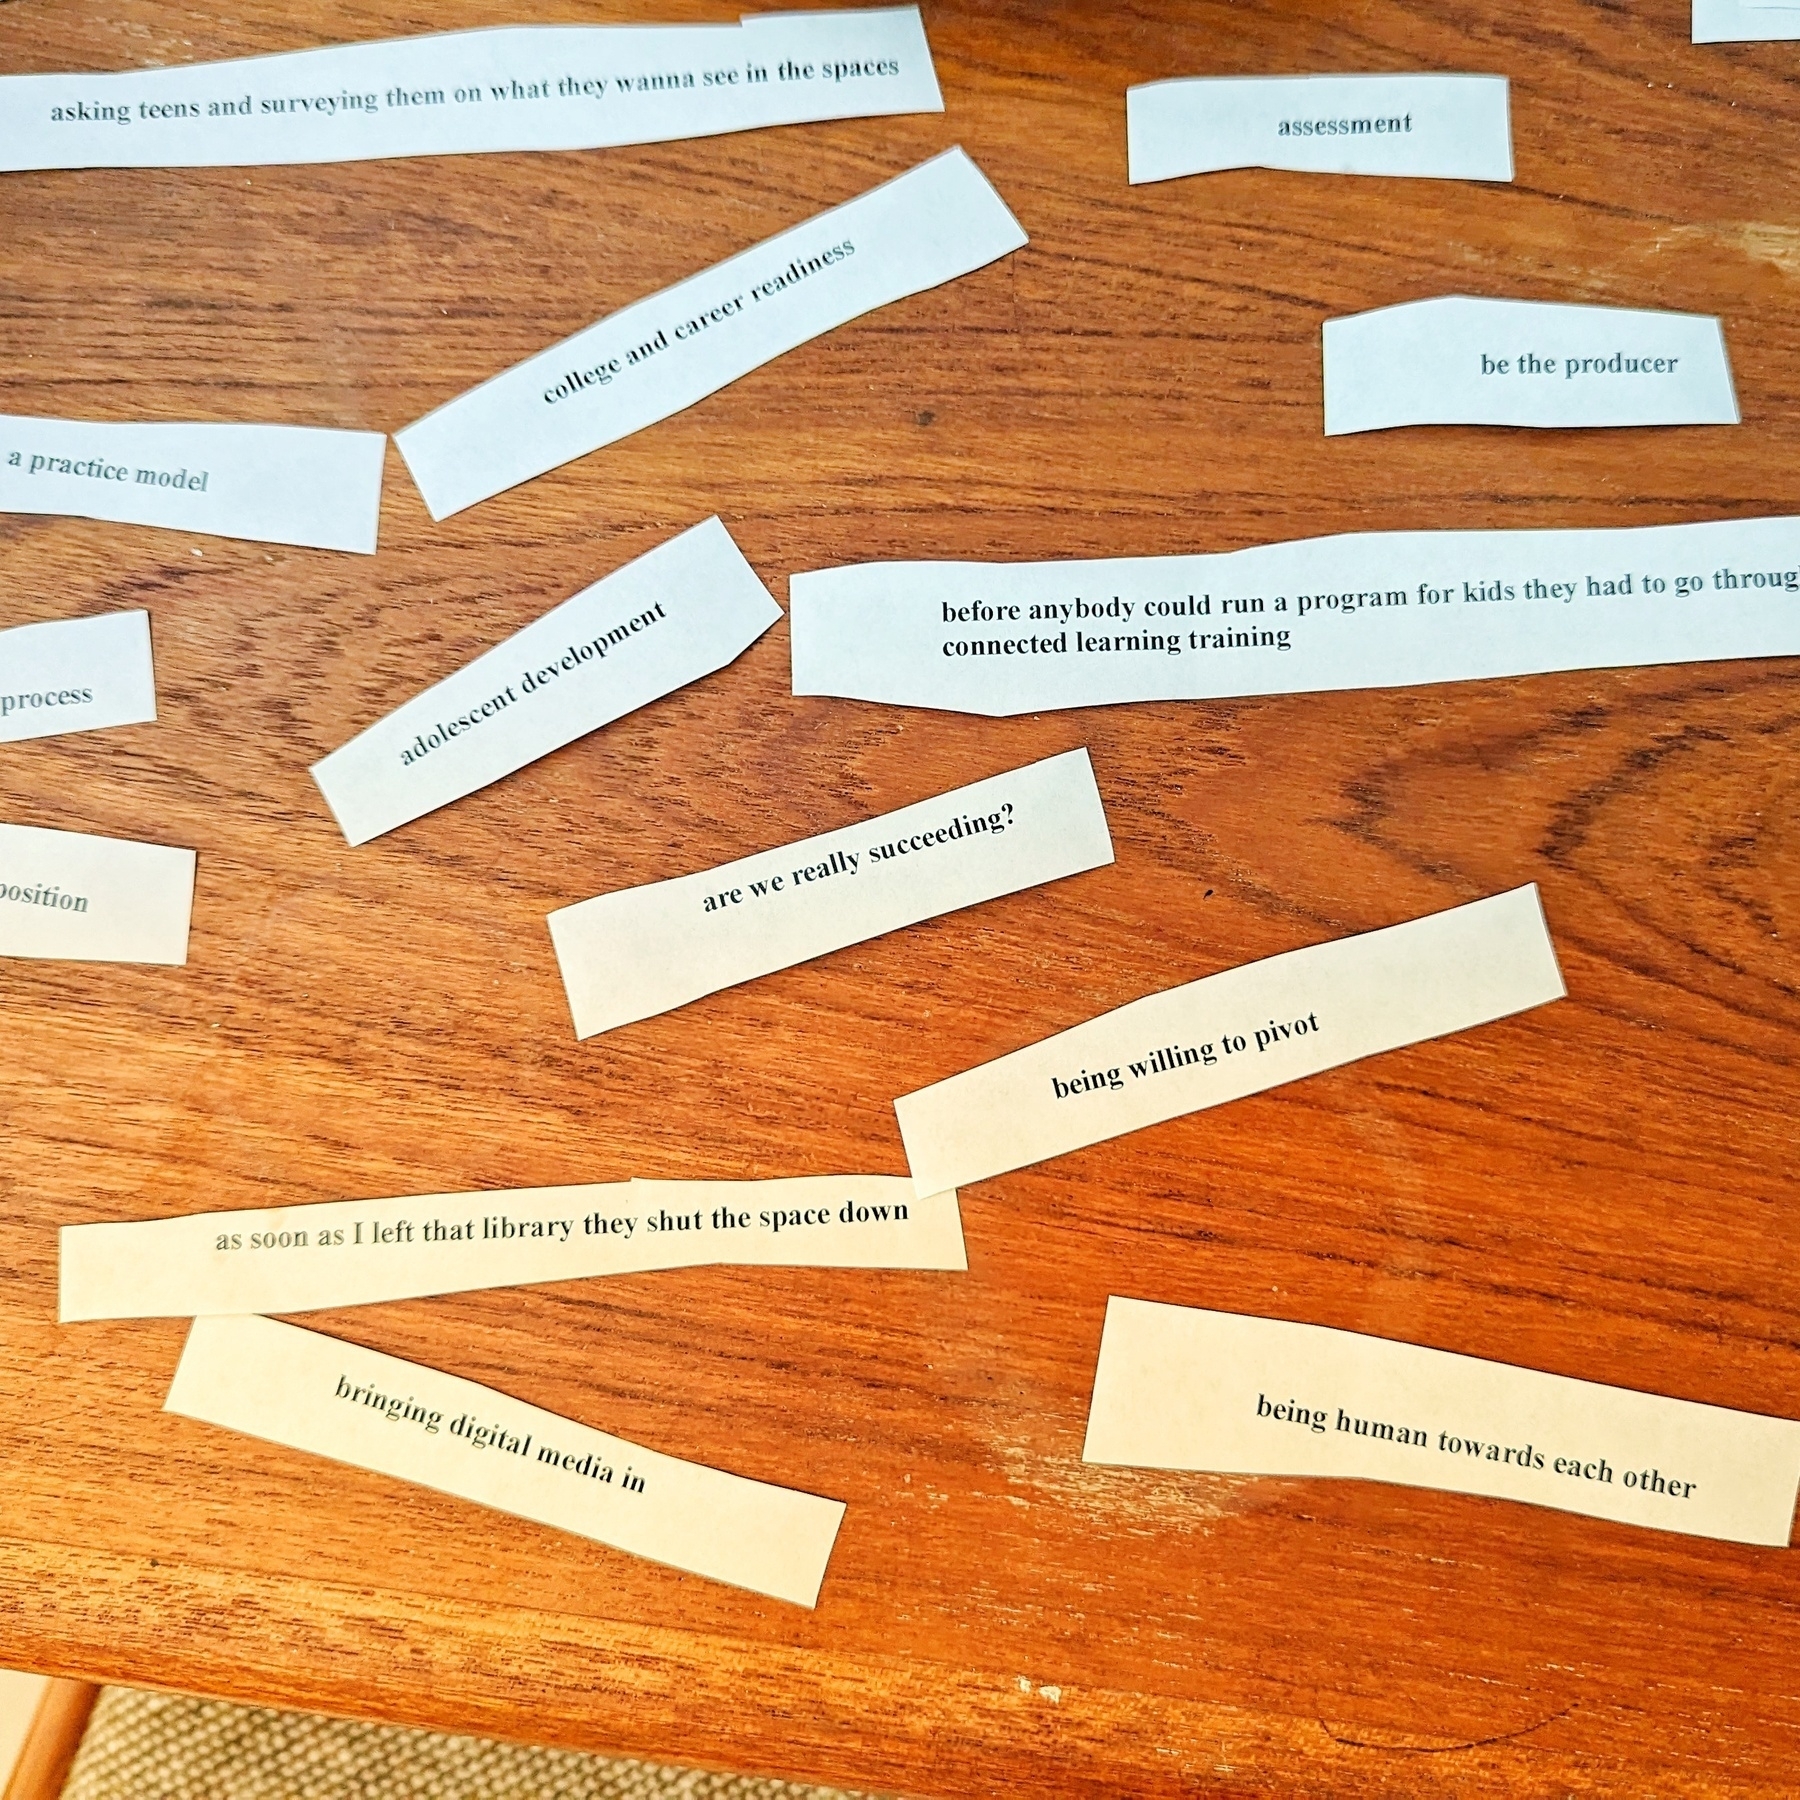 A series of phrases used for qualitative data analysis are printed on strips of paper. These strips are scattered on a tabletop.